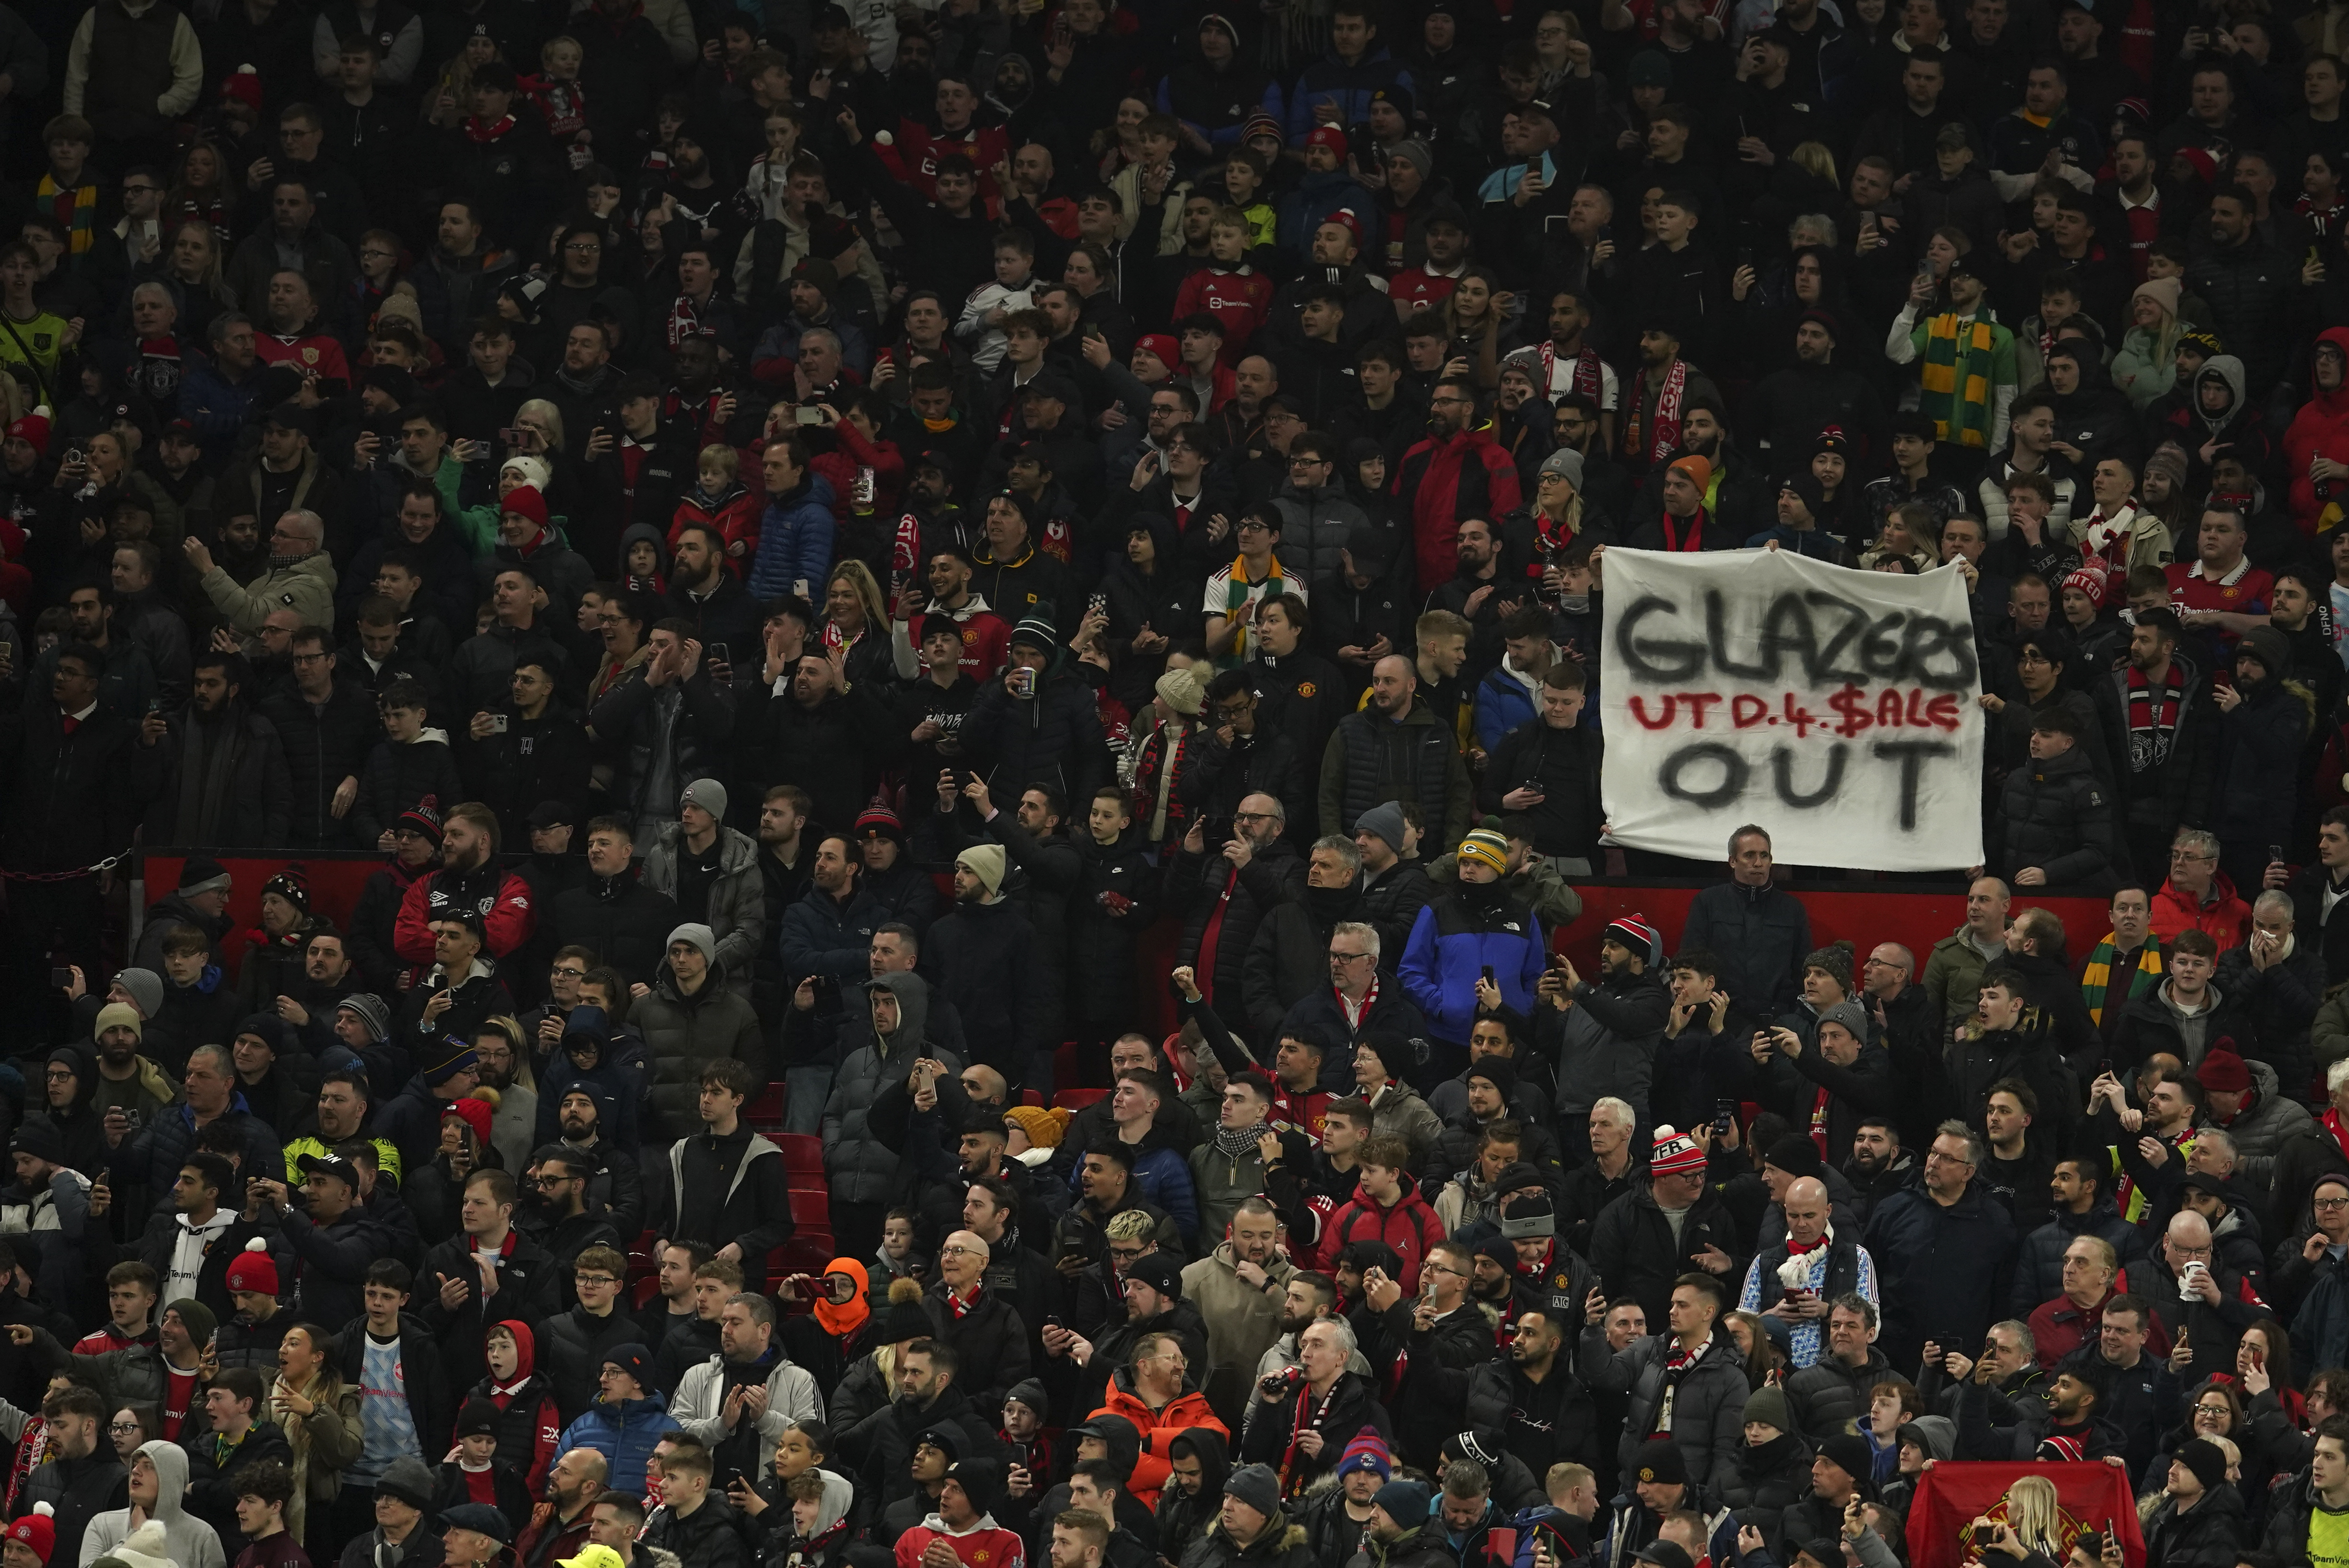 In this February 1, 2023 photo, Manchester United fans hold a banner that reads "Glazers Out" during the second leg of the League Cup semifinal.  On Friday, February 17, 2023, the deadline to submit offers to buy the team arrives.  (AP Photo/Dave Thompson)